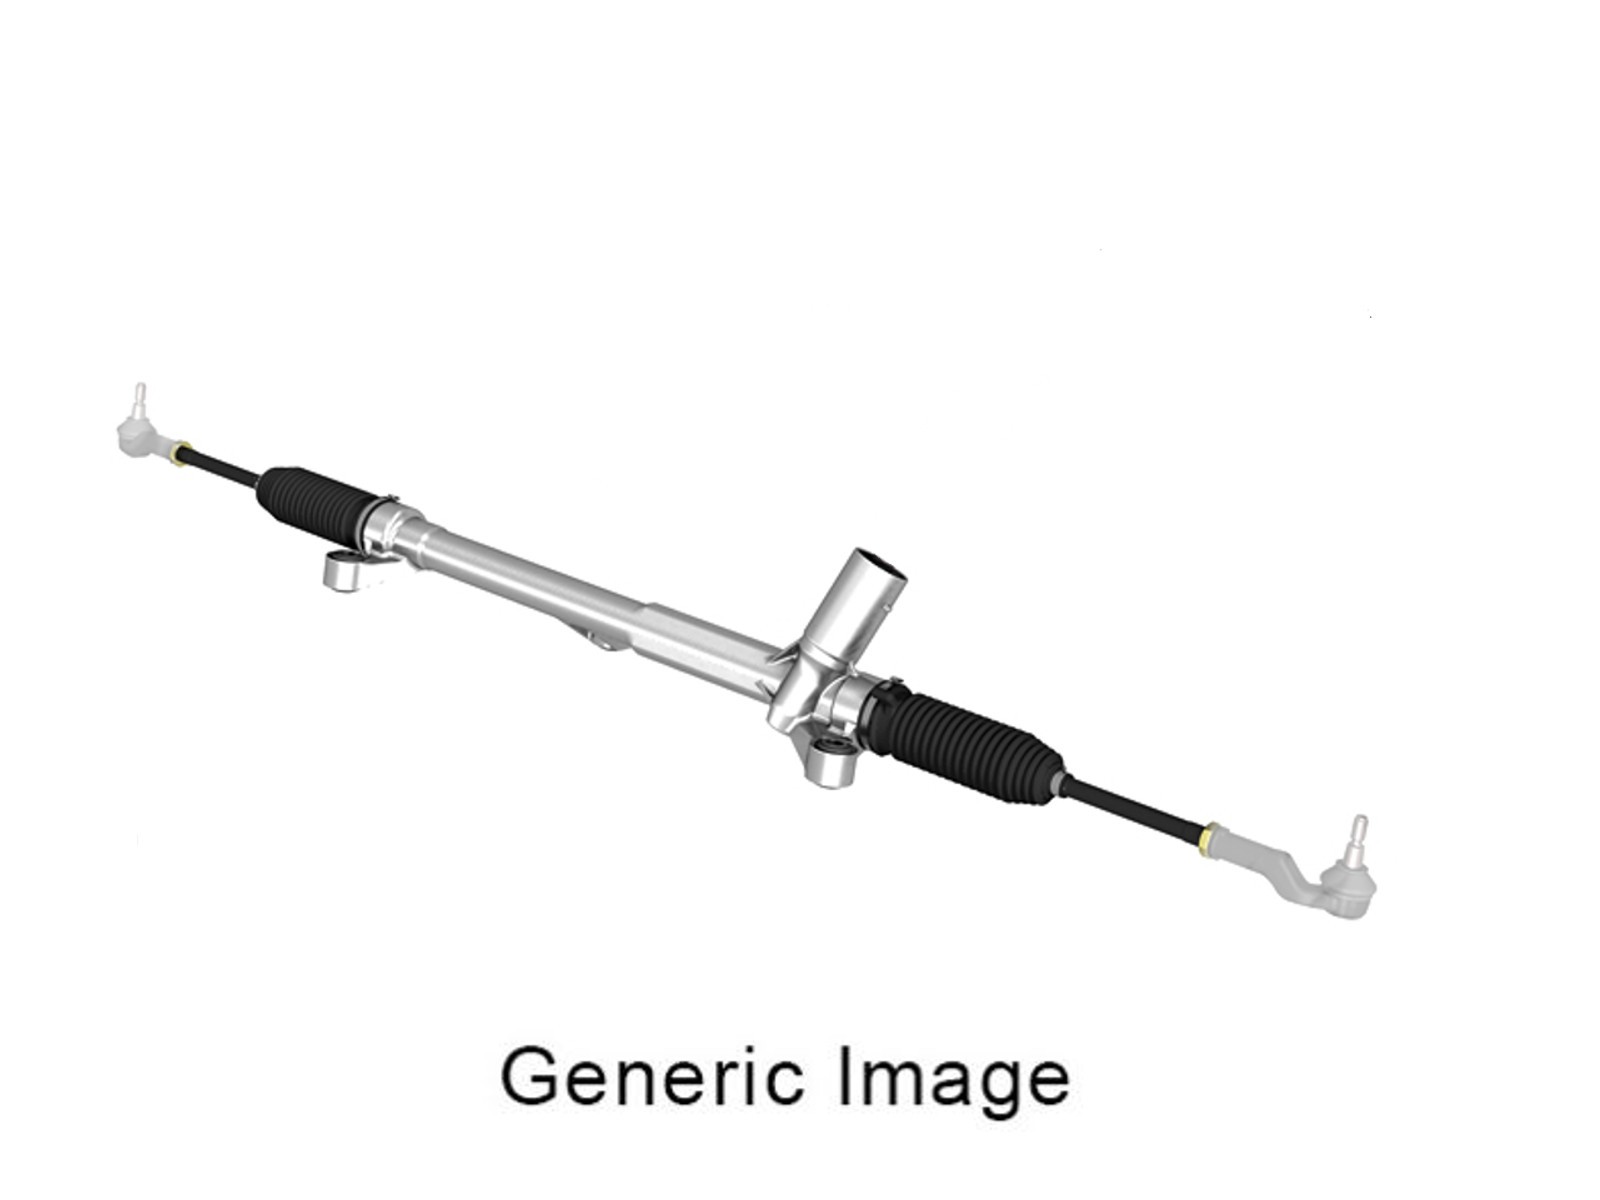 Rack and Pinion Power Steering Diagram Renault Megane Mk2 Steering Rack 2 0 2 0d 04 to 09 Pinion Shaftec Of Rack and Pinion Power Steering Diagram